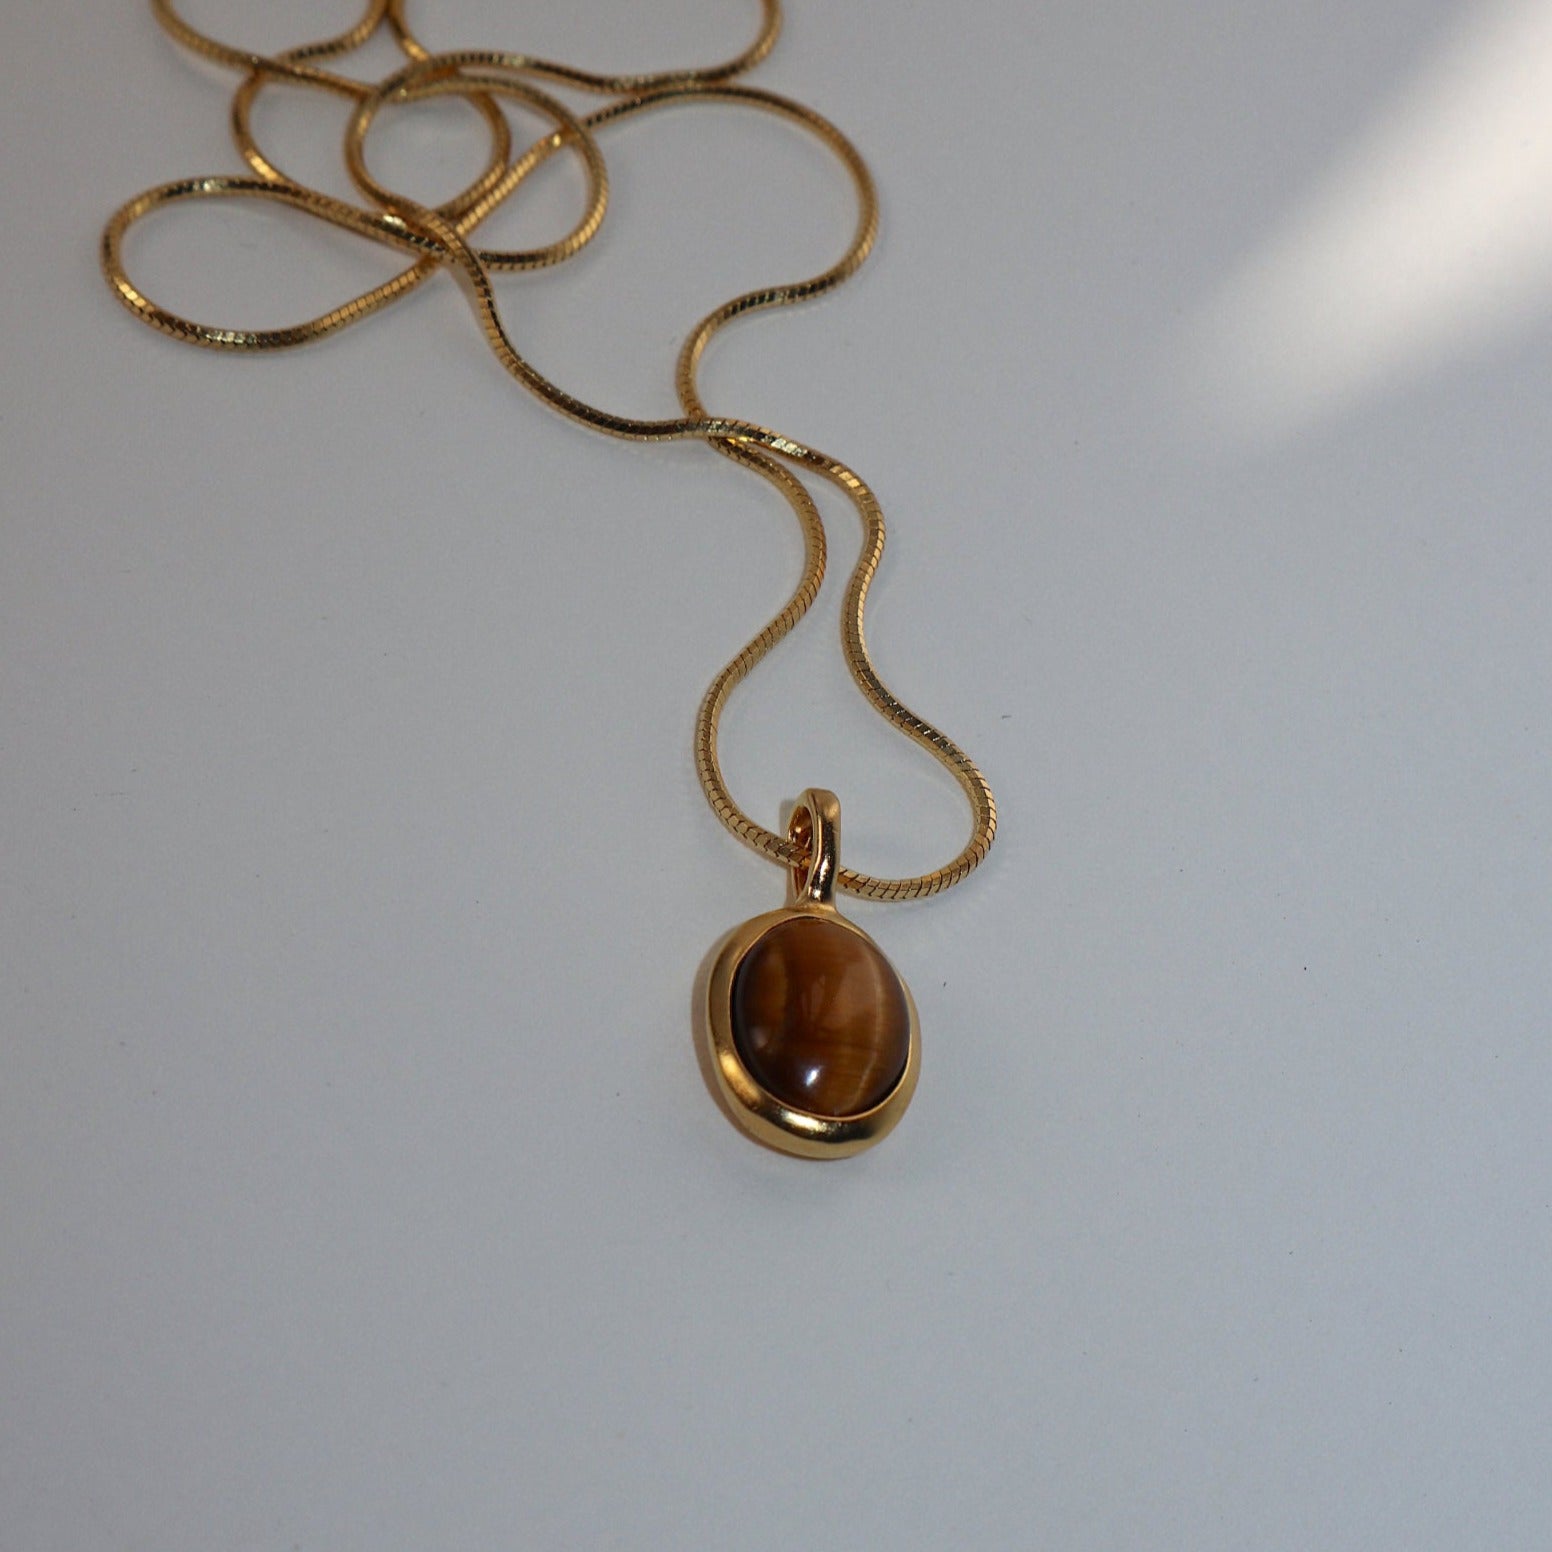 The 'Tiger's Eye' Oval Necklace